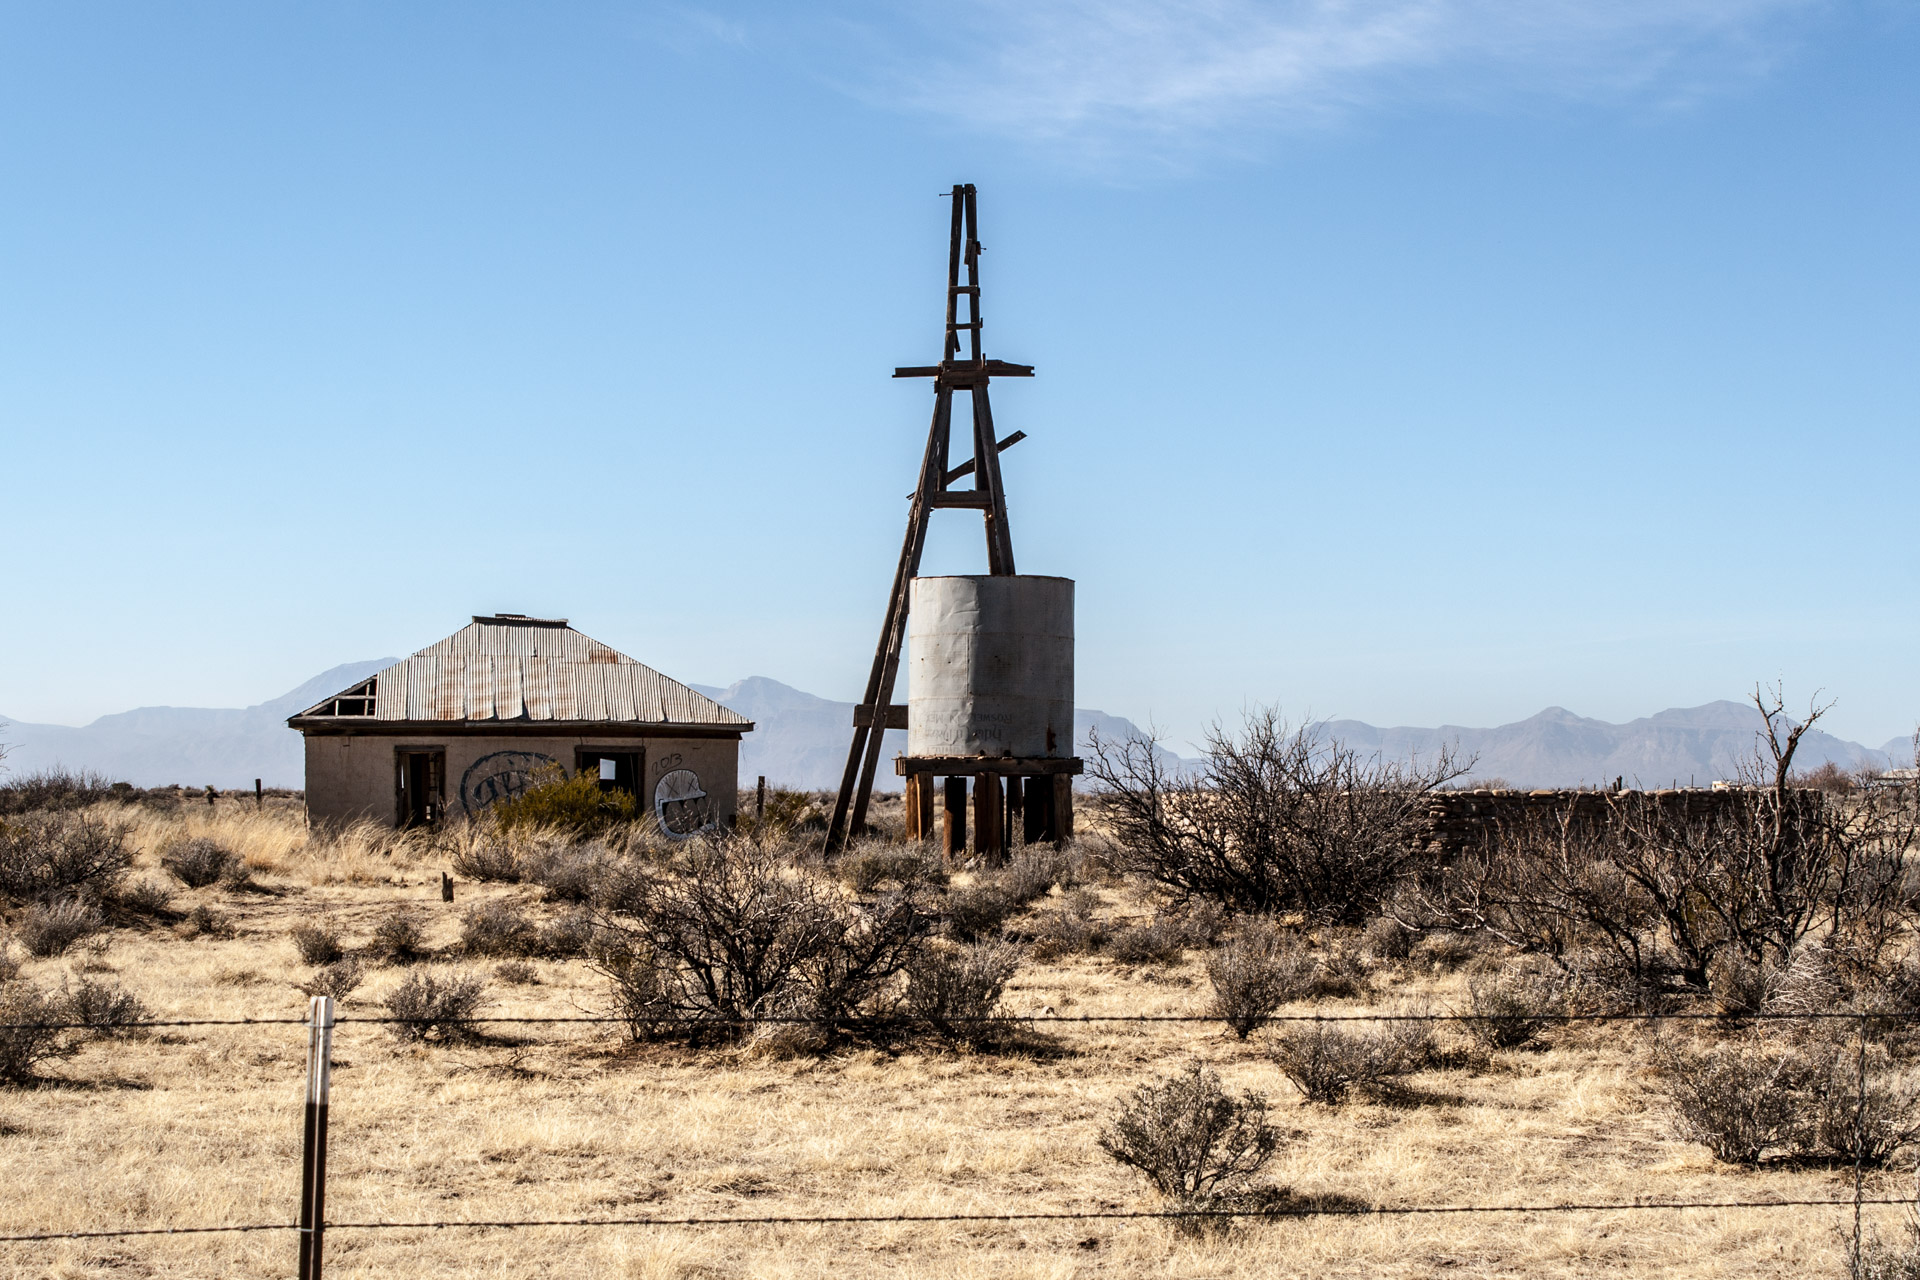 Tularosa, New Mexico - A Desert House With An Extra Large Well